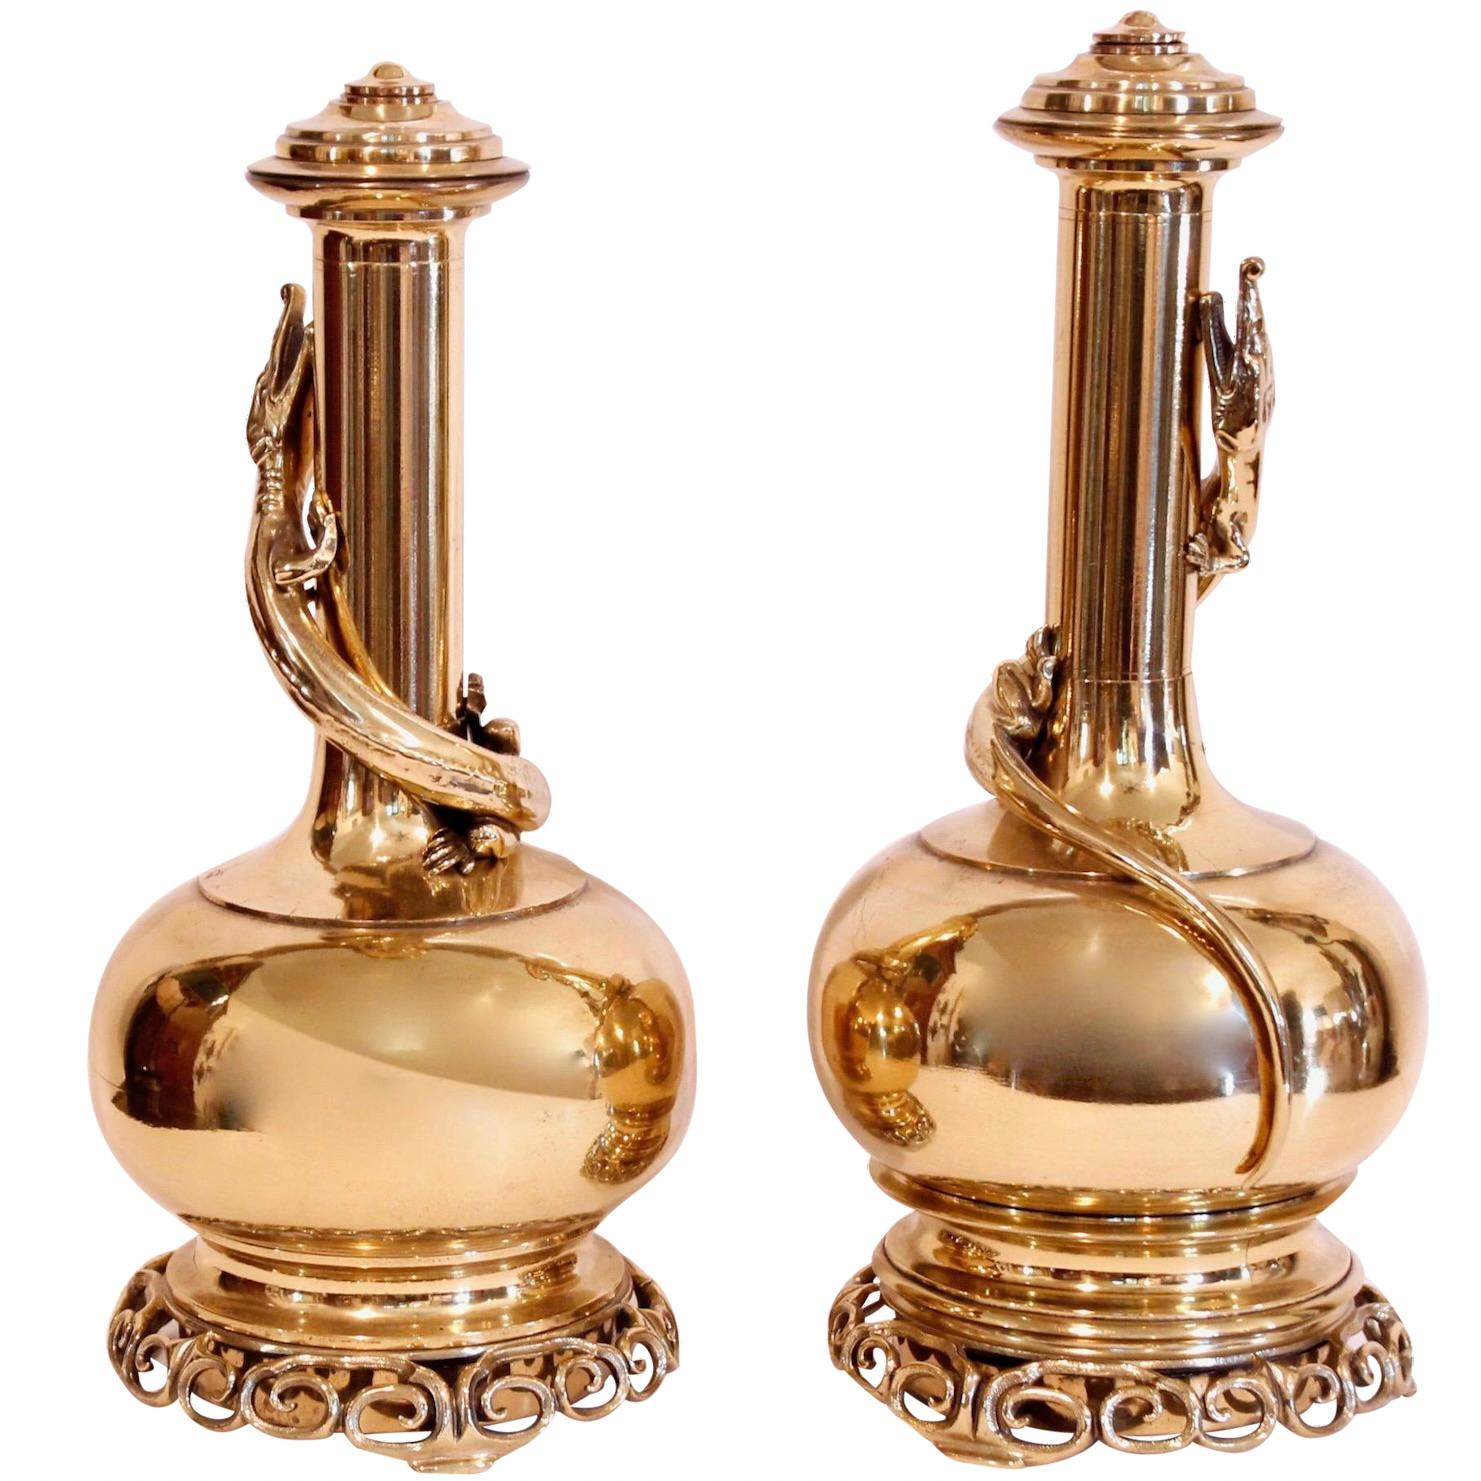 A striking and decorative pair of handsome brass bottle flasks, originally oil lamps,  fitted with intricate openwork fretwork bases. An alligator like lizard is wrapped around each. There is a screw cap at the top of each opening to a reservoir